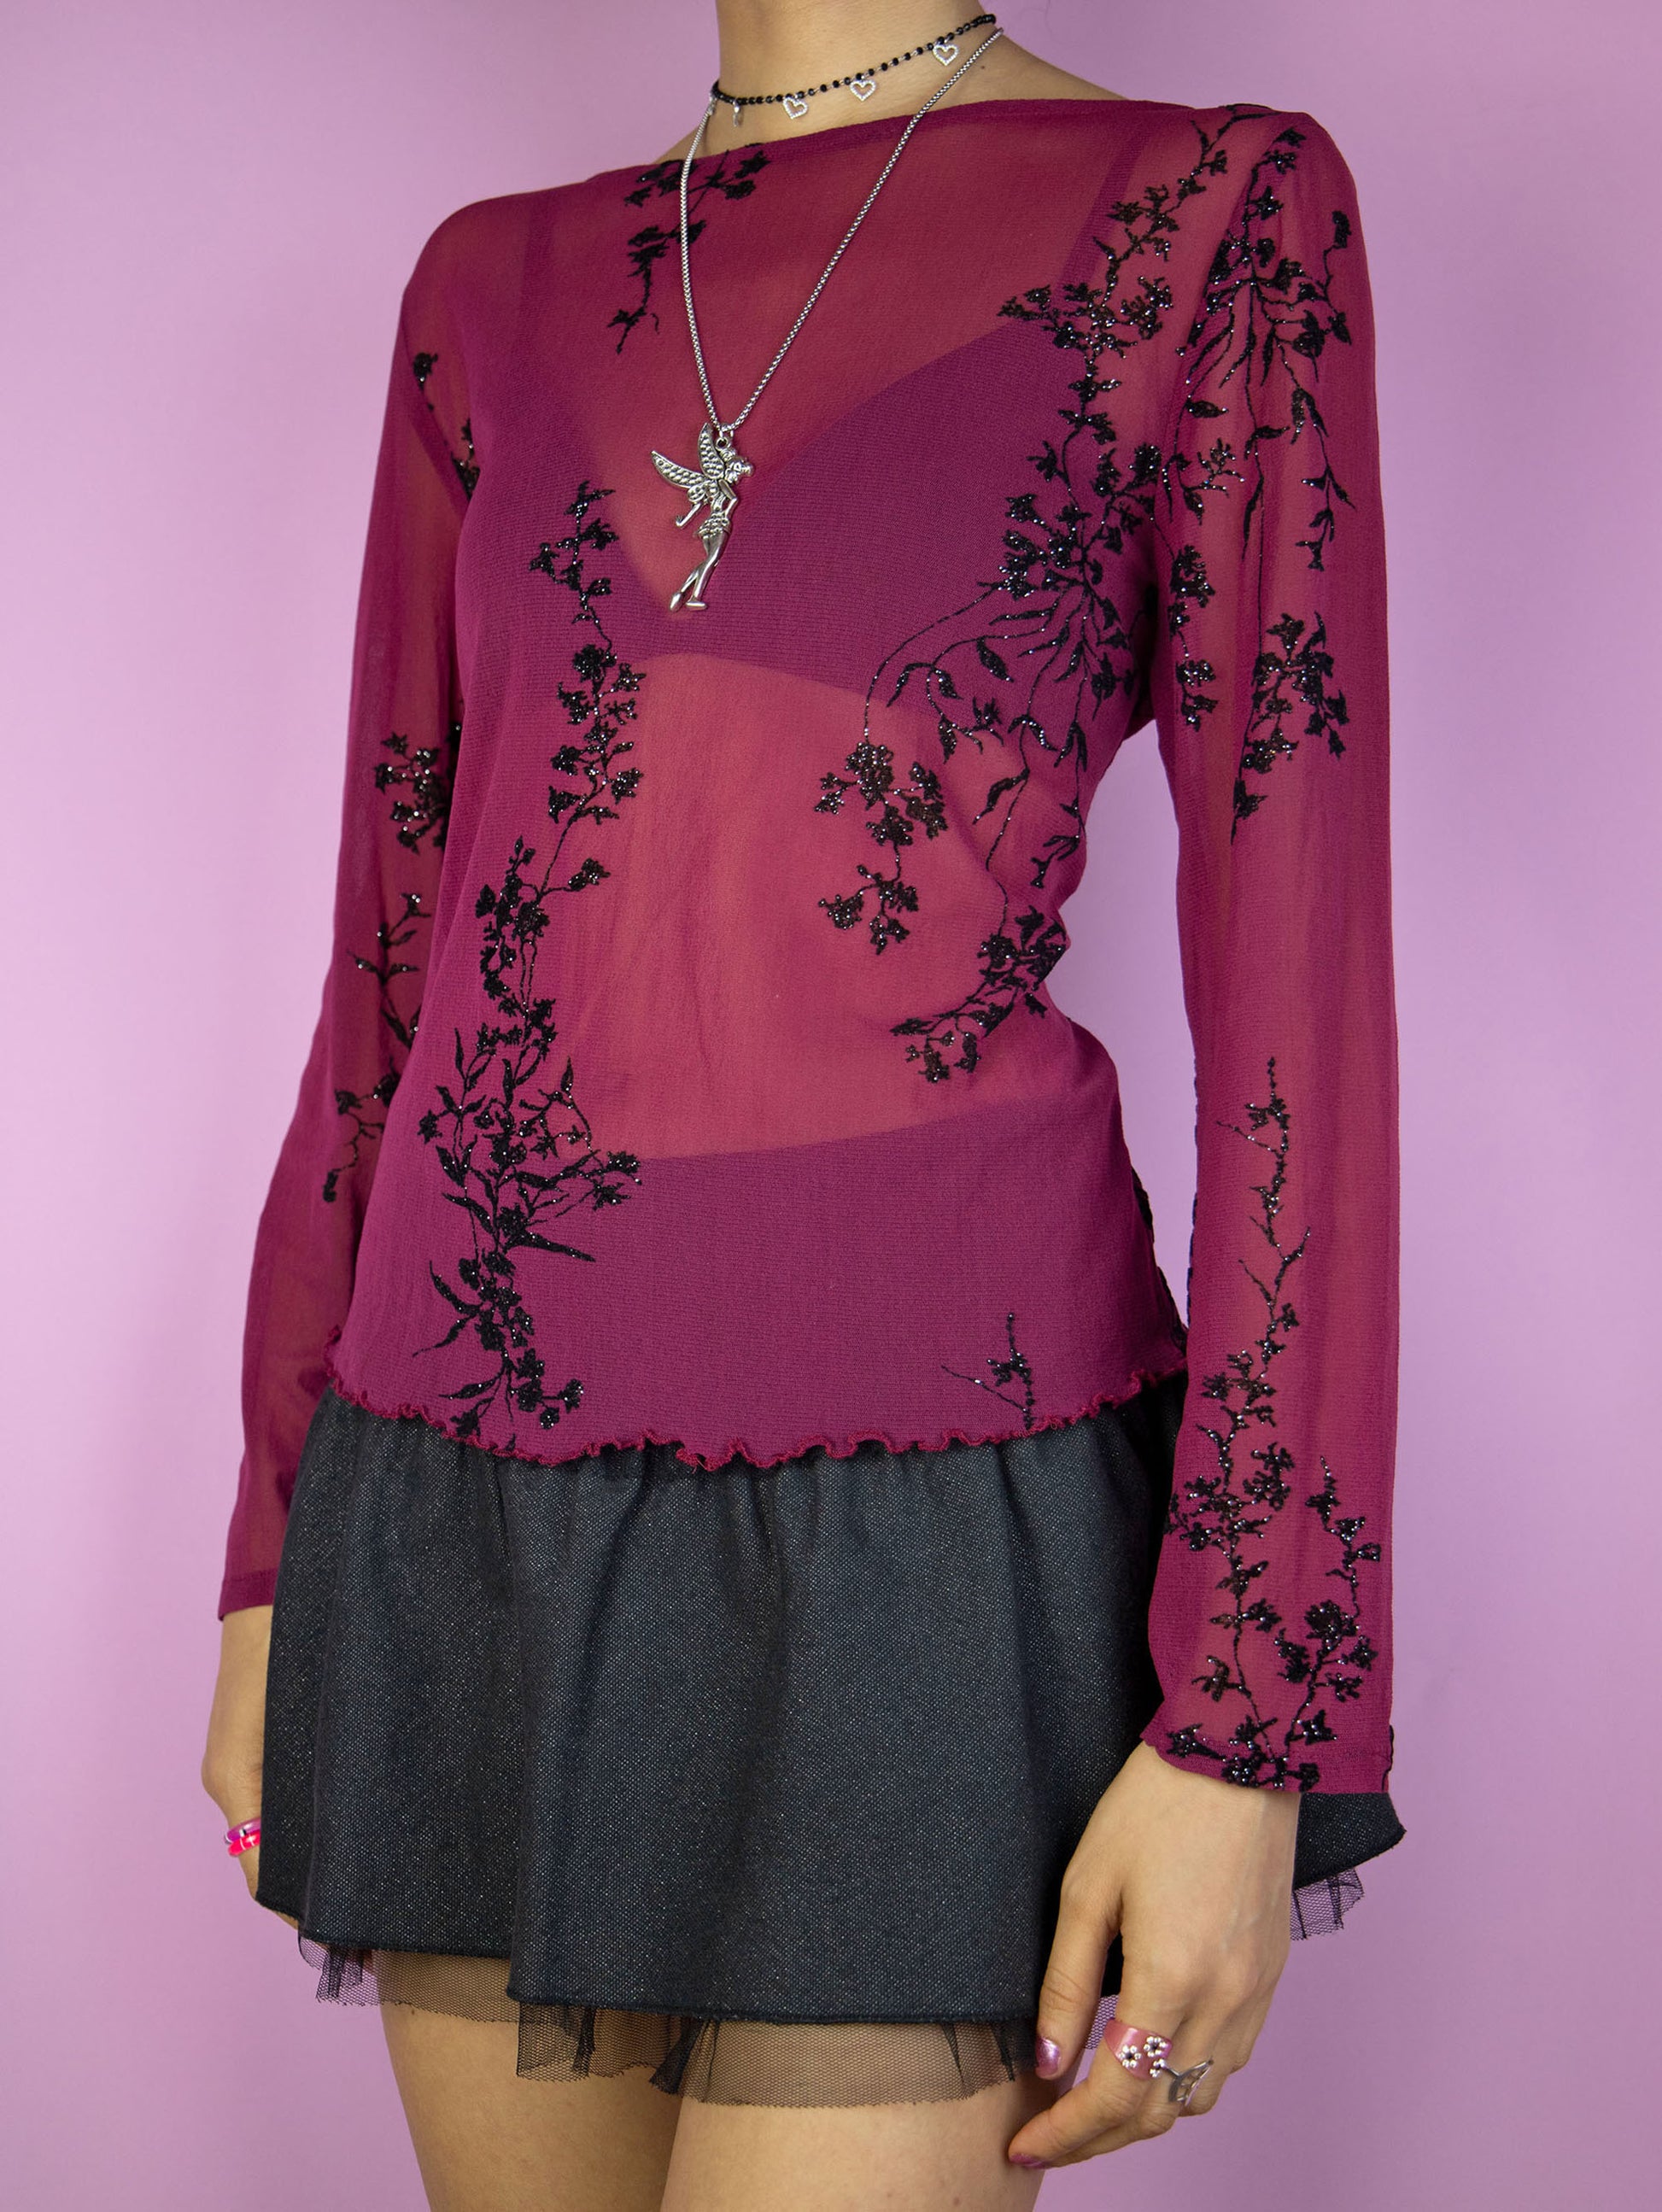 The Vintage 90s Maroon Mesh Top is an elegant dark romantic fairy inspired burgundy red long sleeve semi-sheer top with black sparkle floral details, back button closure and lettuce hem.